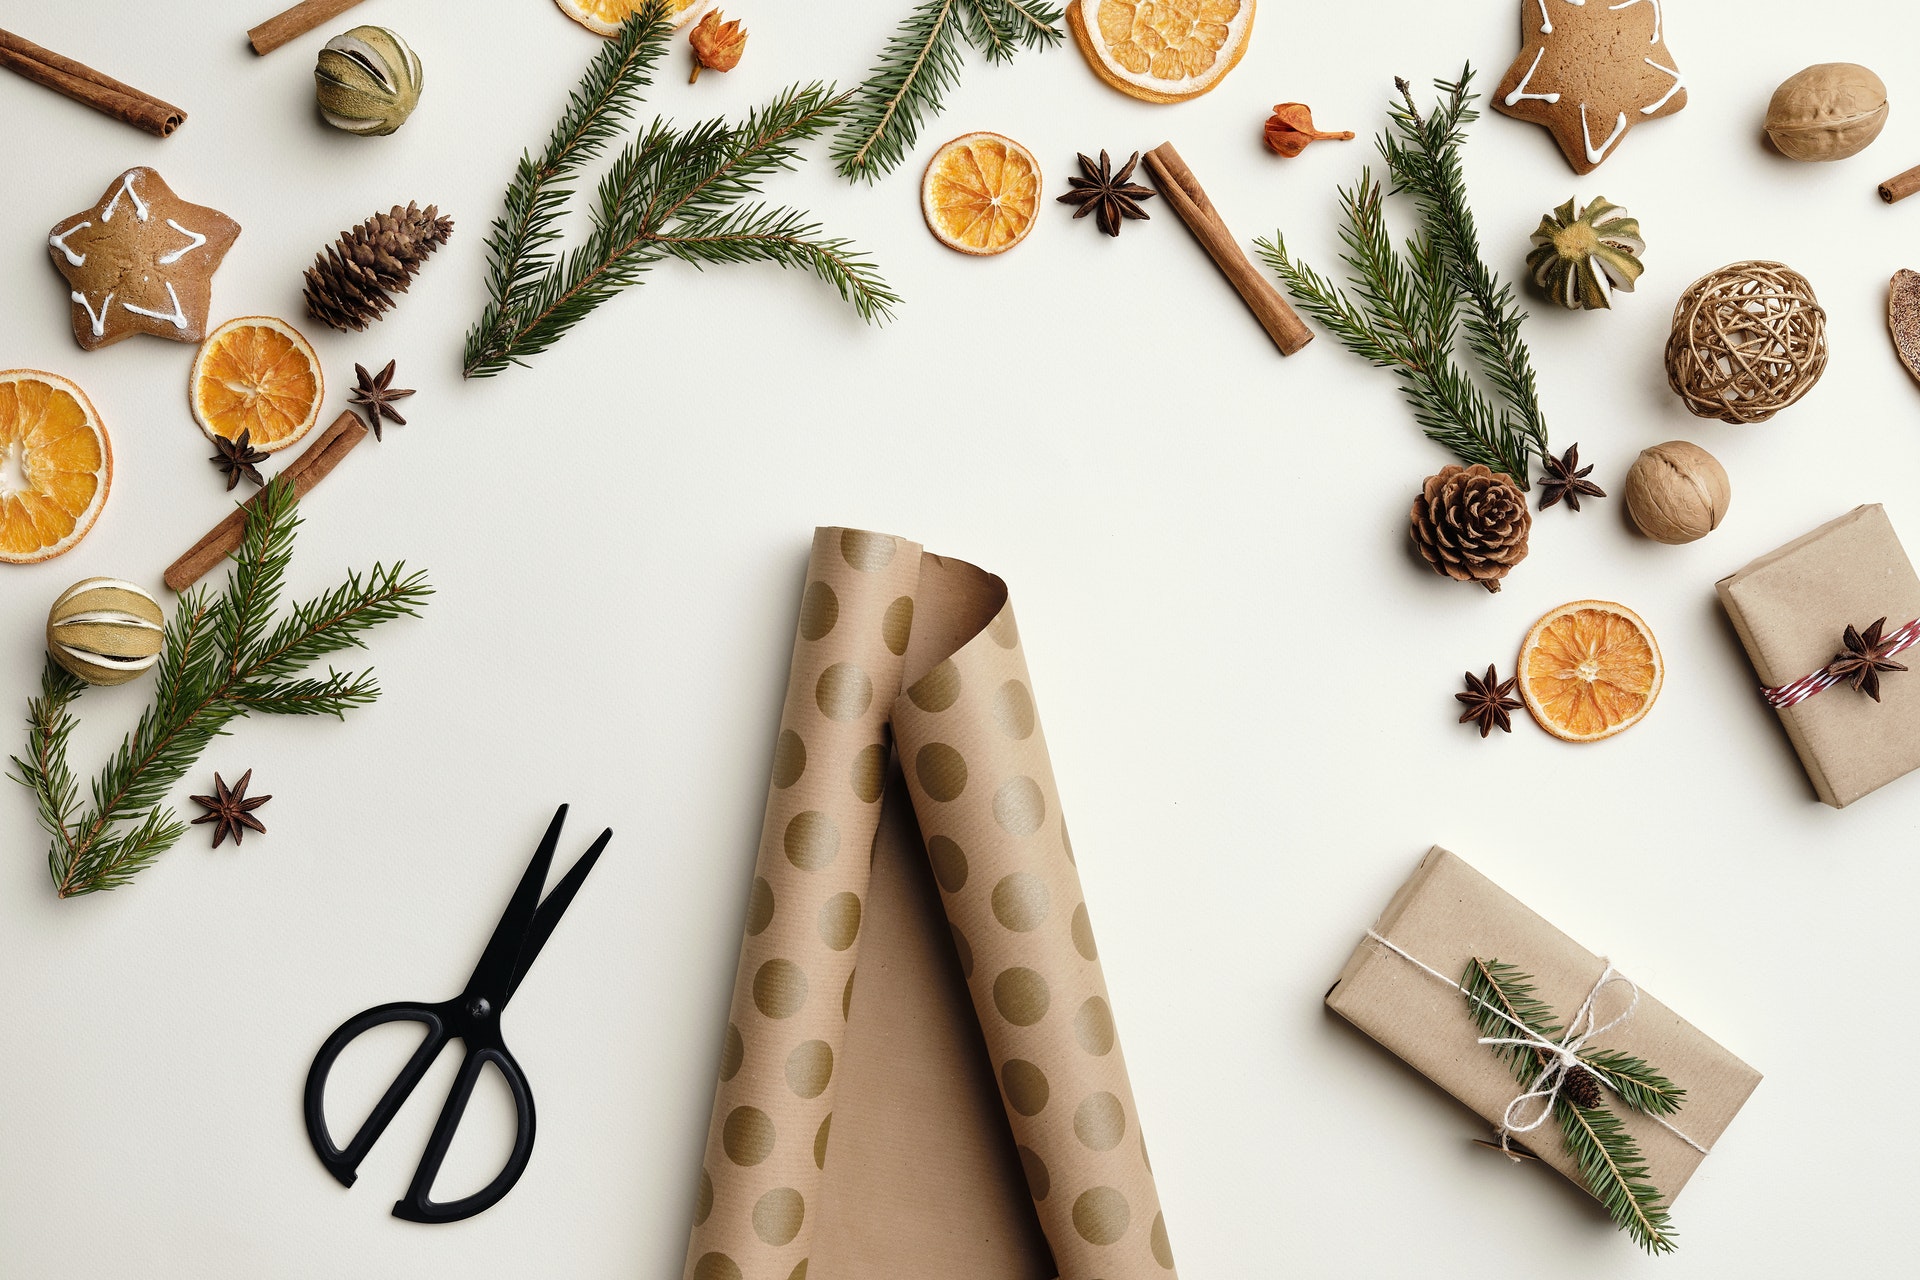 ways to detox your mind and body after the holidays